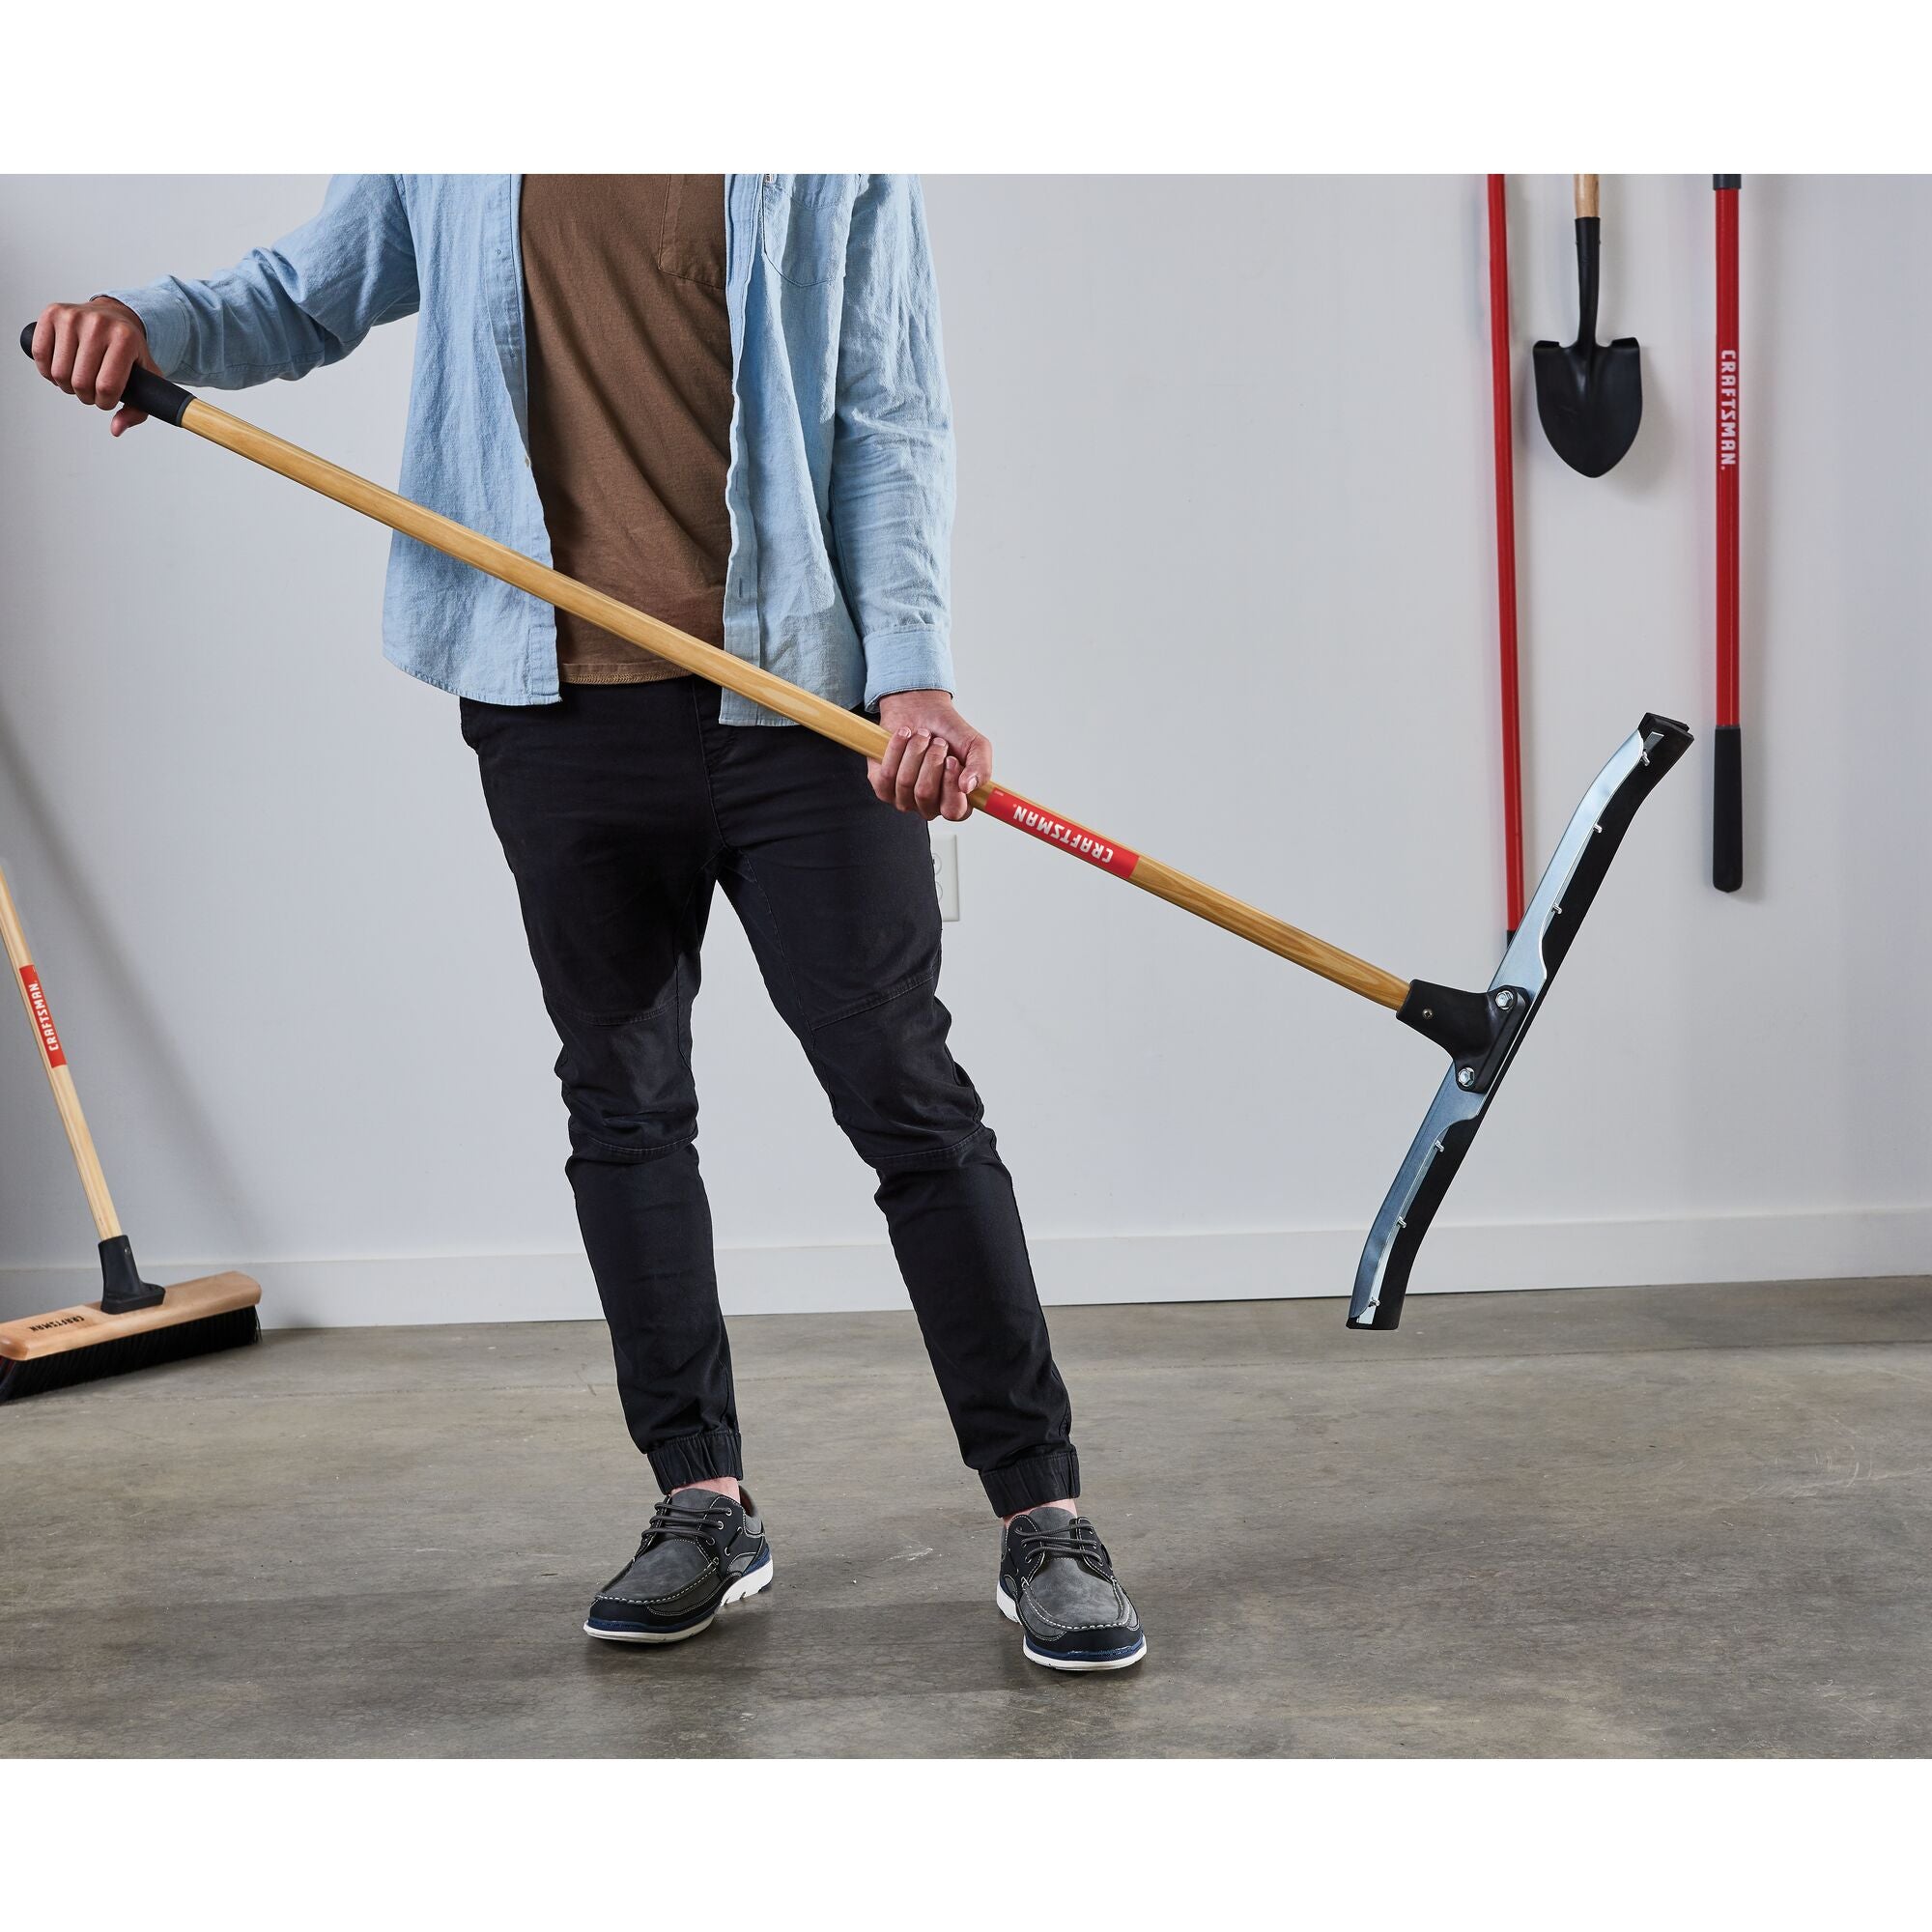 24 inch dual-blade floor squeegee in a garage with shovels and brooms